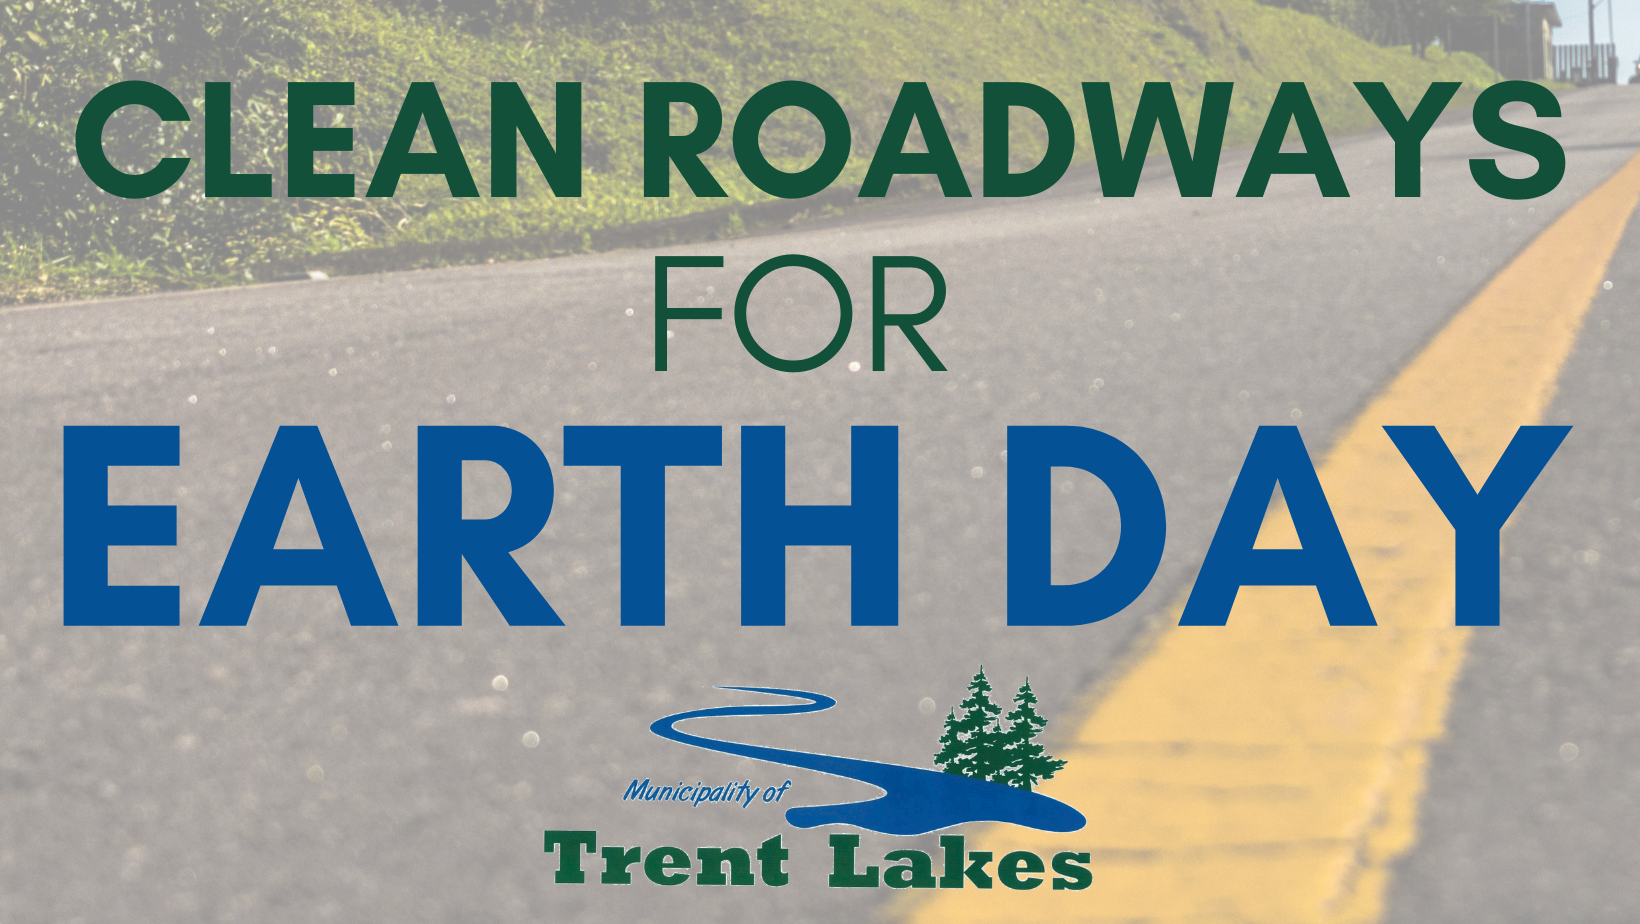 Roadways for earth day banner